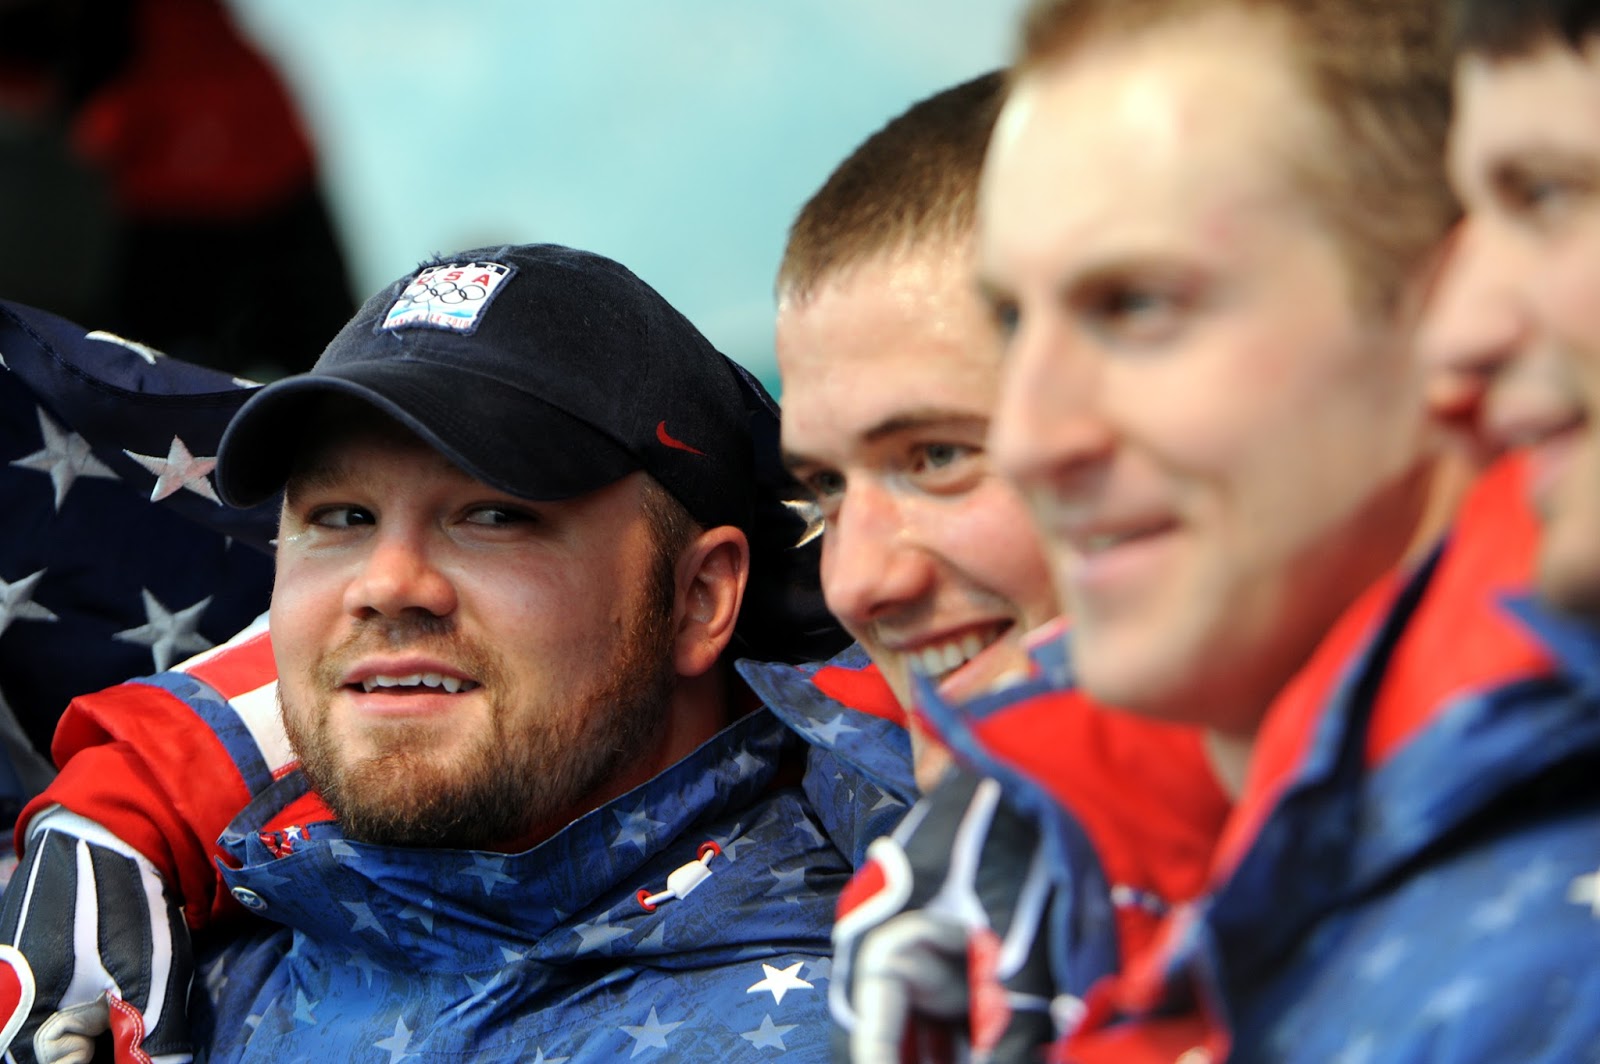 American bobsledder and Olympic gold medalist, Steven Holcomb, was initially diagnosed with keratoconus in 2002.